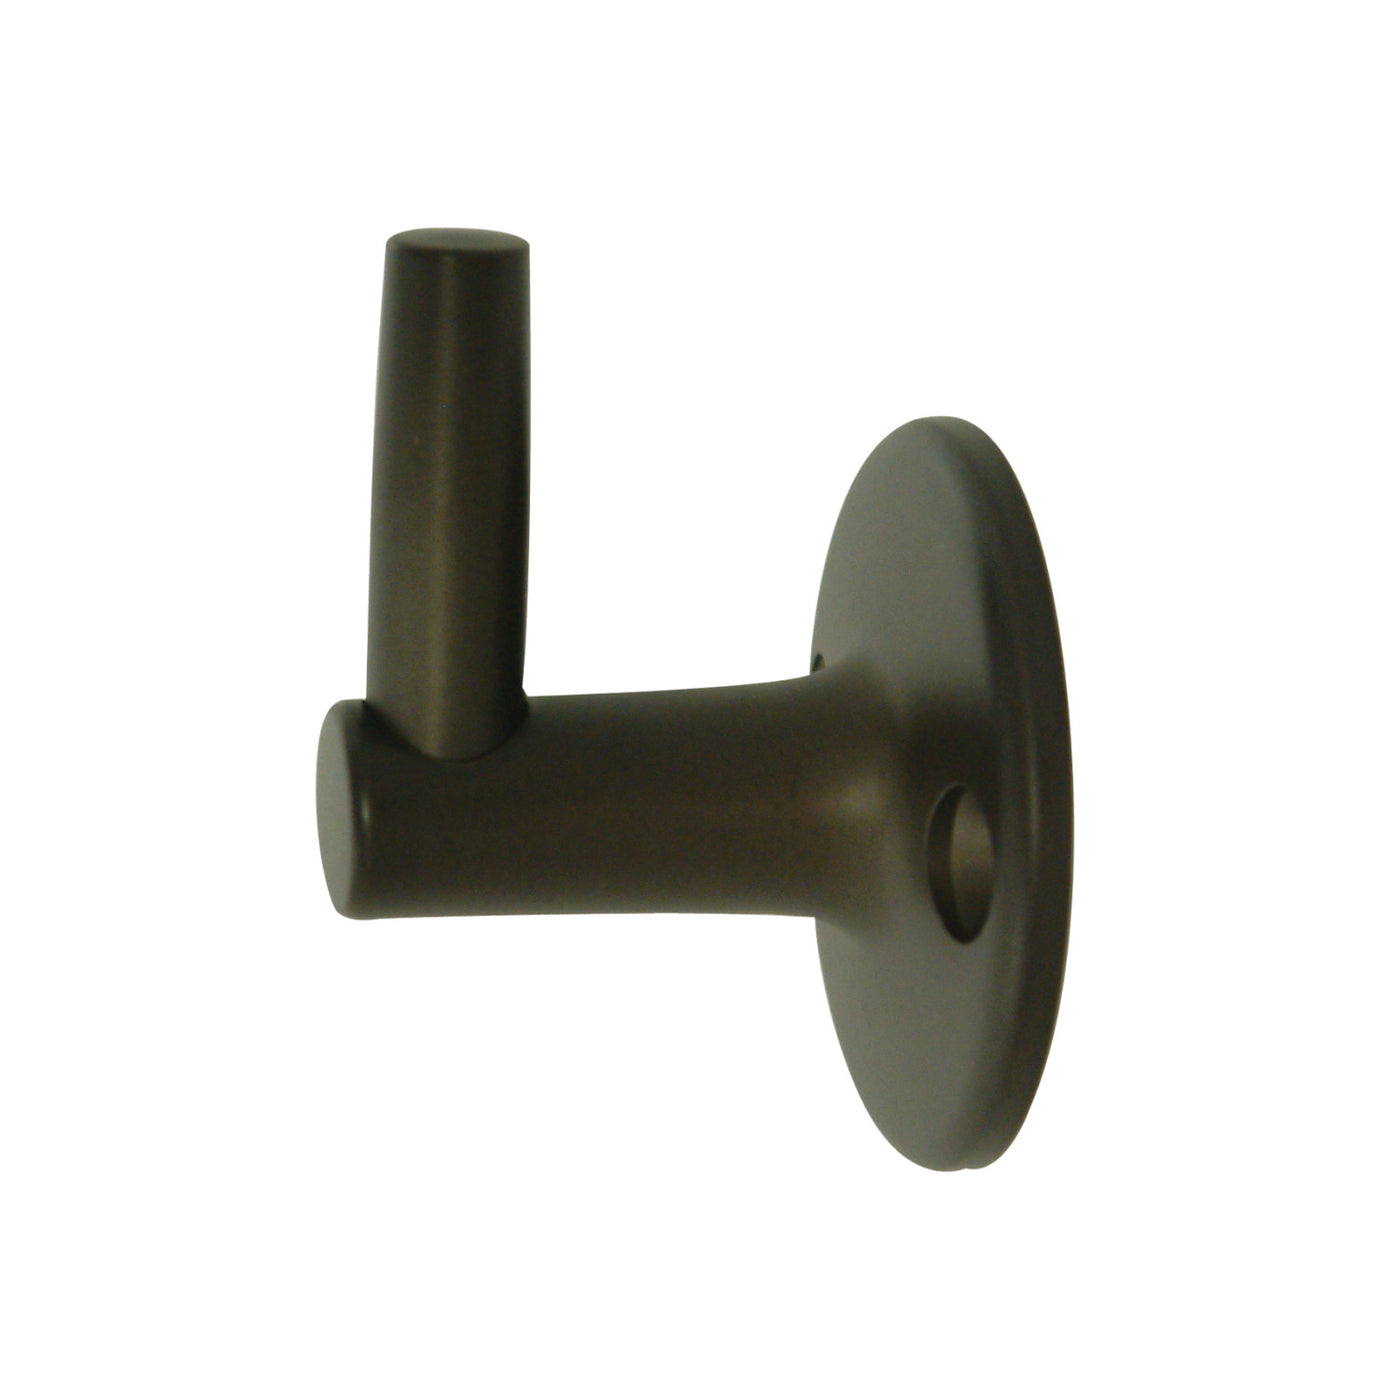 Elements of Design DK171A5 Hand Shower Pin Wall Mount Bracket, Oil Rubbed Bronze